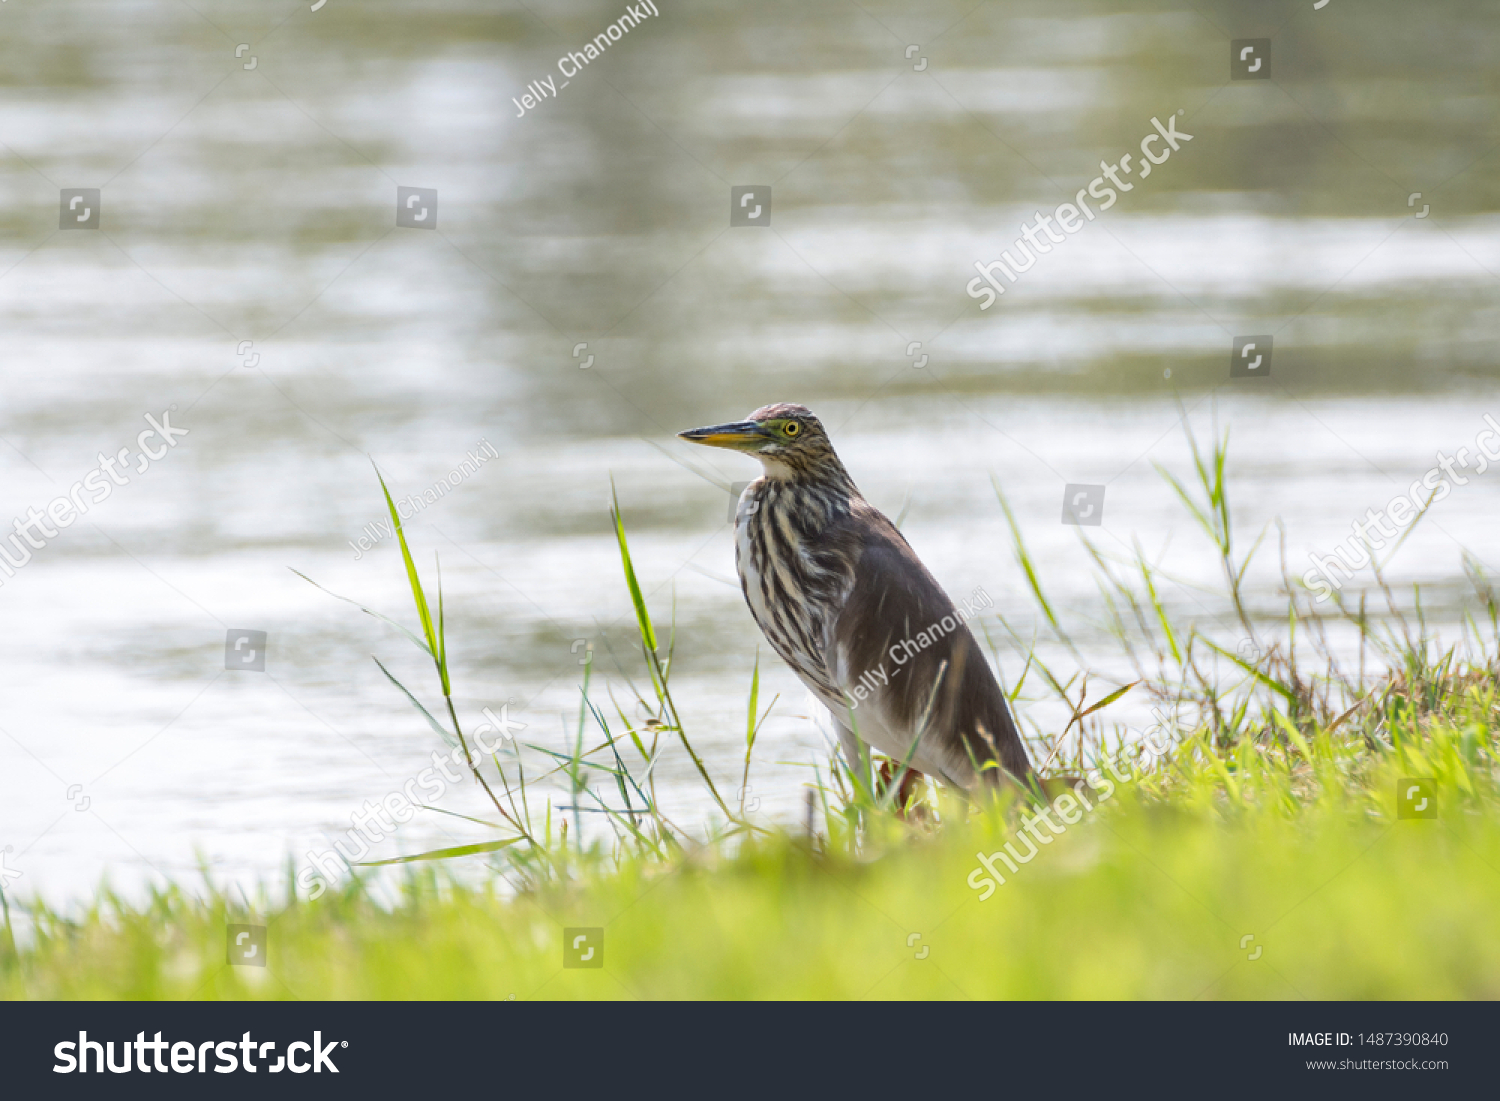 Chinese Pond Heron. / Chinese pond heron (Ardeola bacchus) watching fish. /  Chinese pond heron bird find food by river. #1487390840